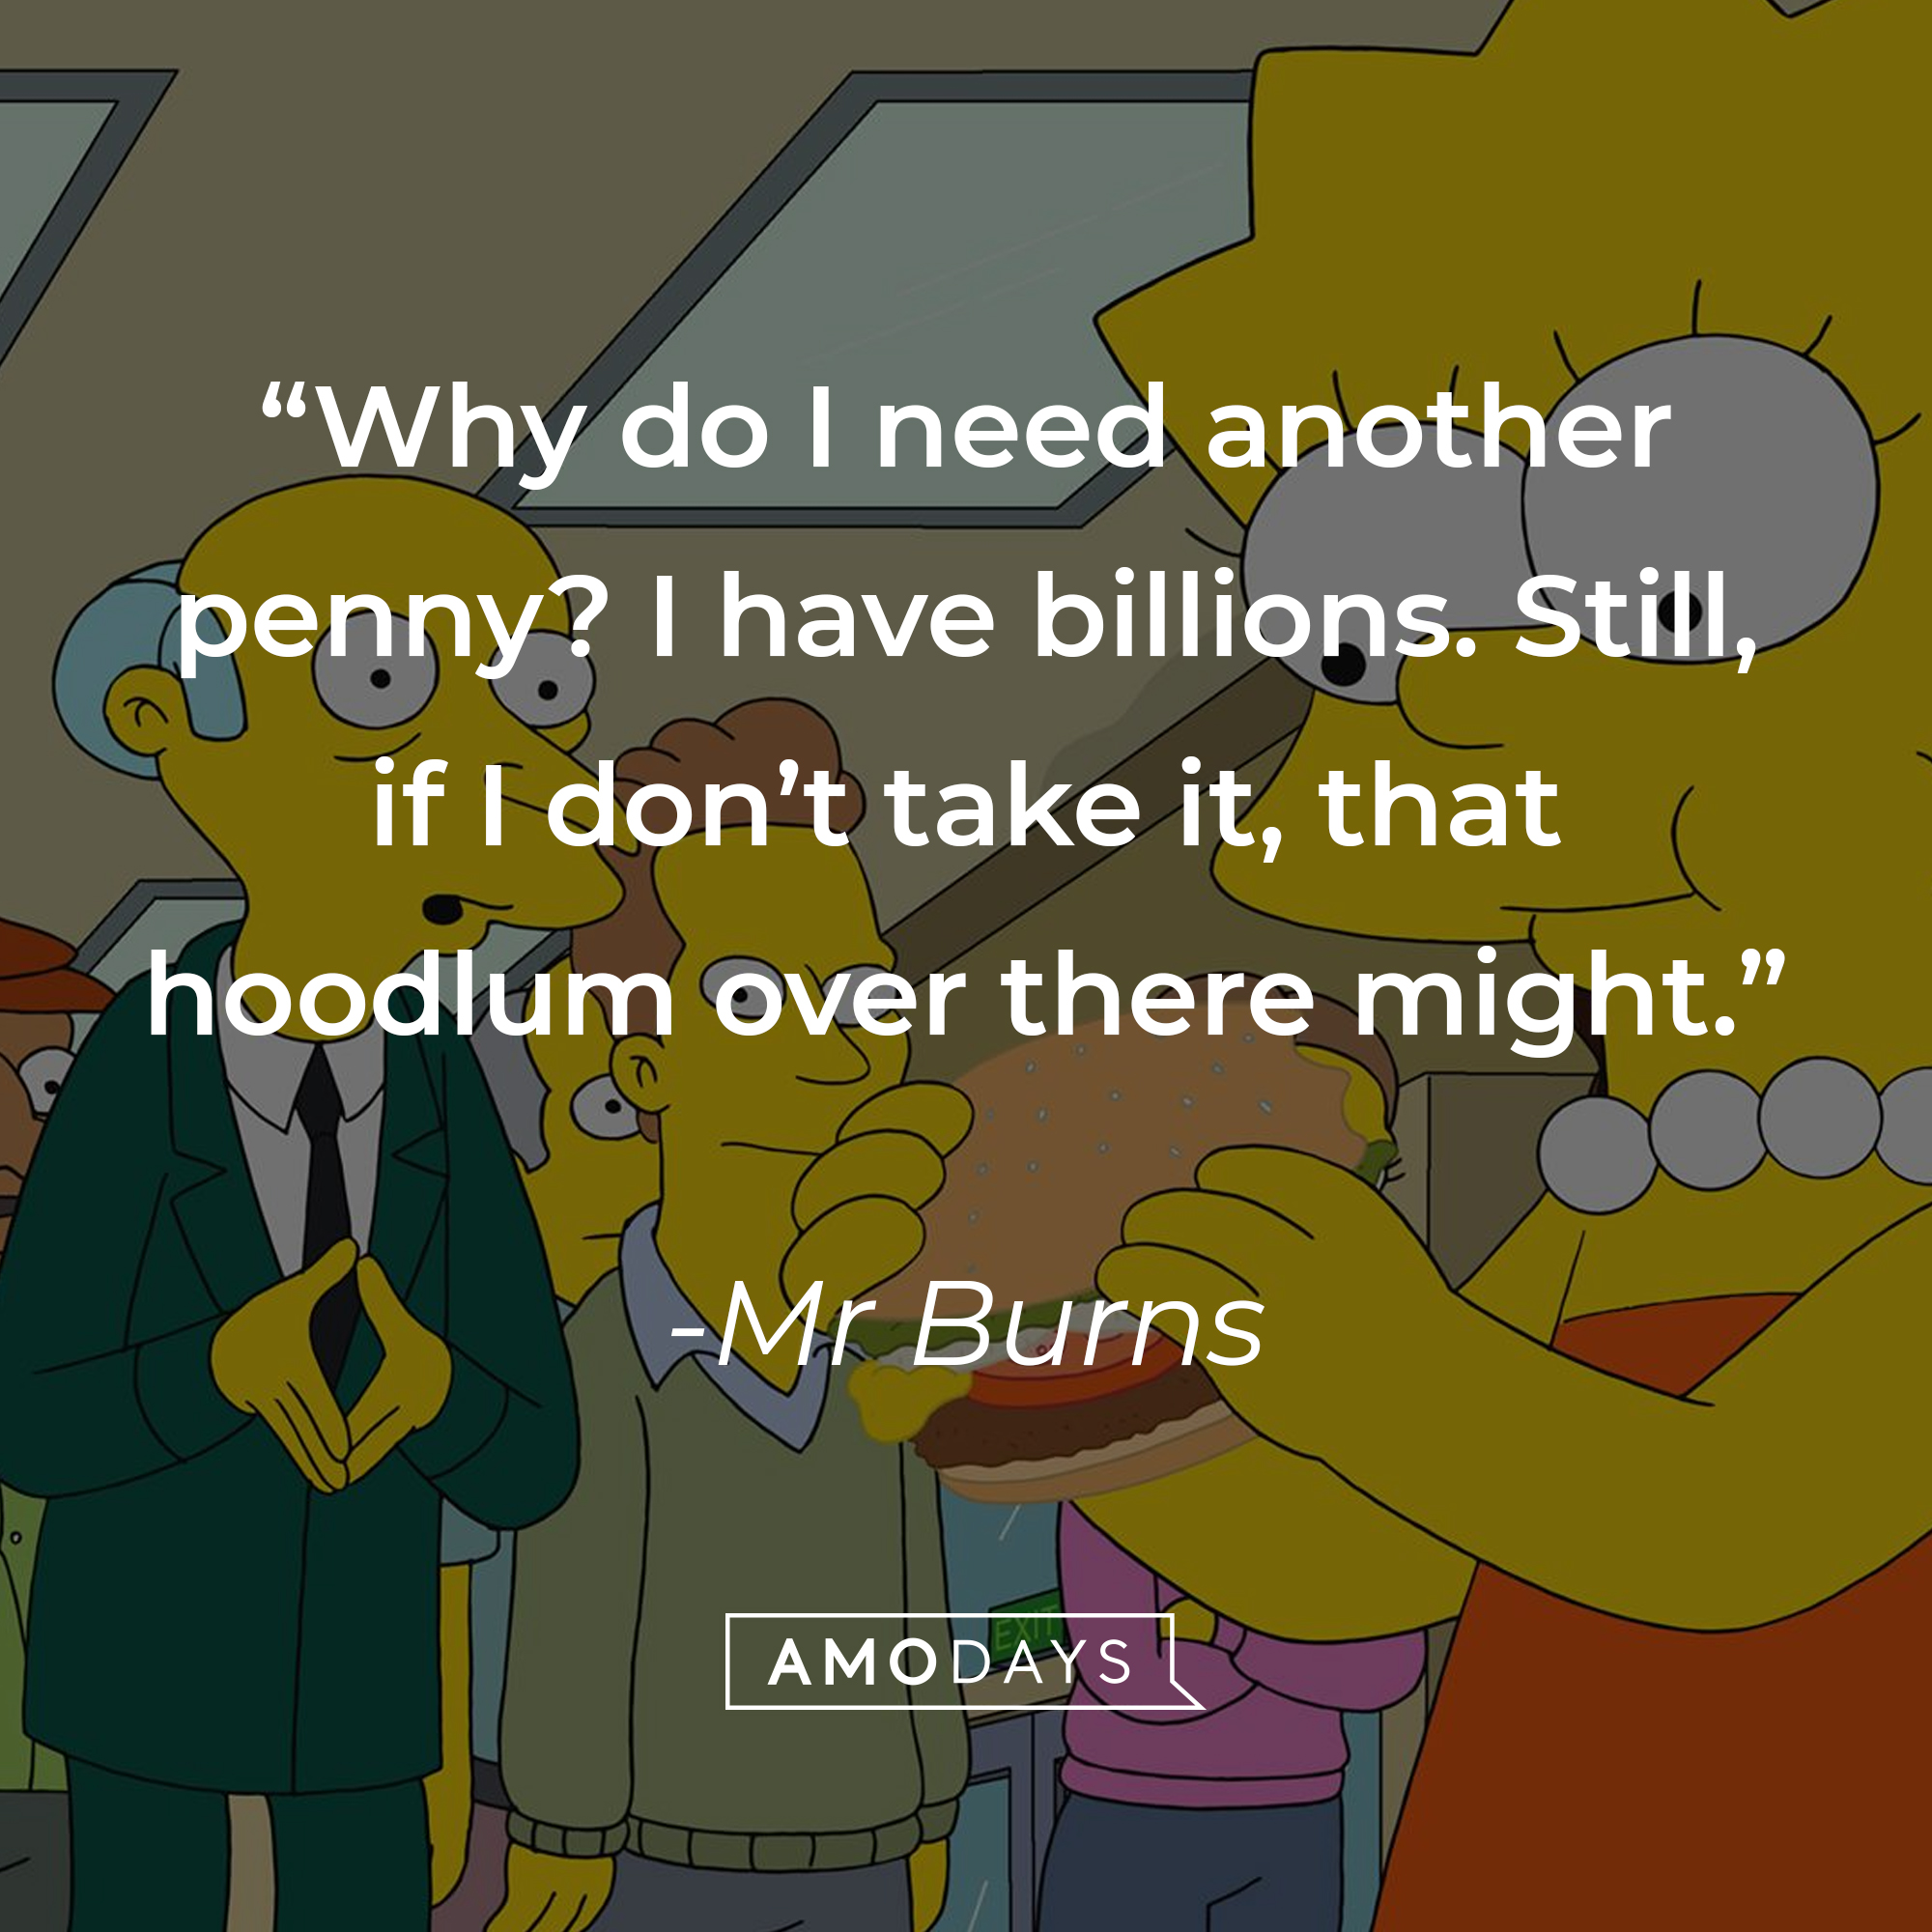 Mr. Burns' quote: "Why do I need another penny? I have billions. Still, if I don't take it, that hoodlum over there might." | Source: facebook.com/TheSimpsons